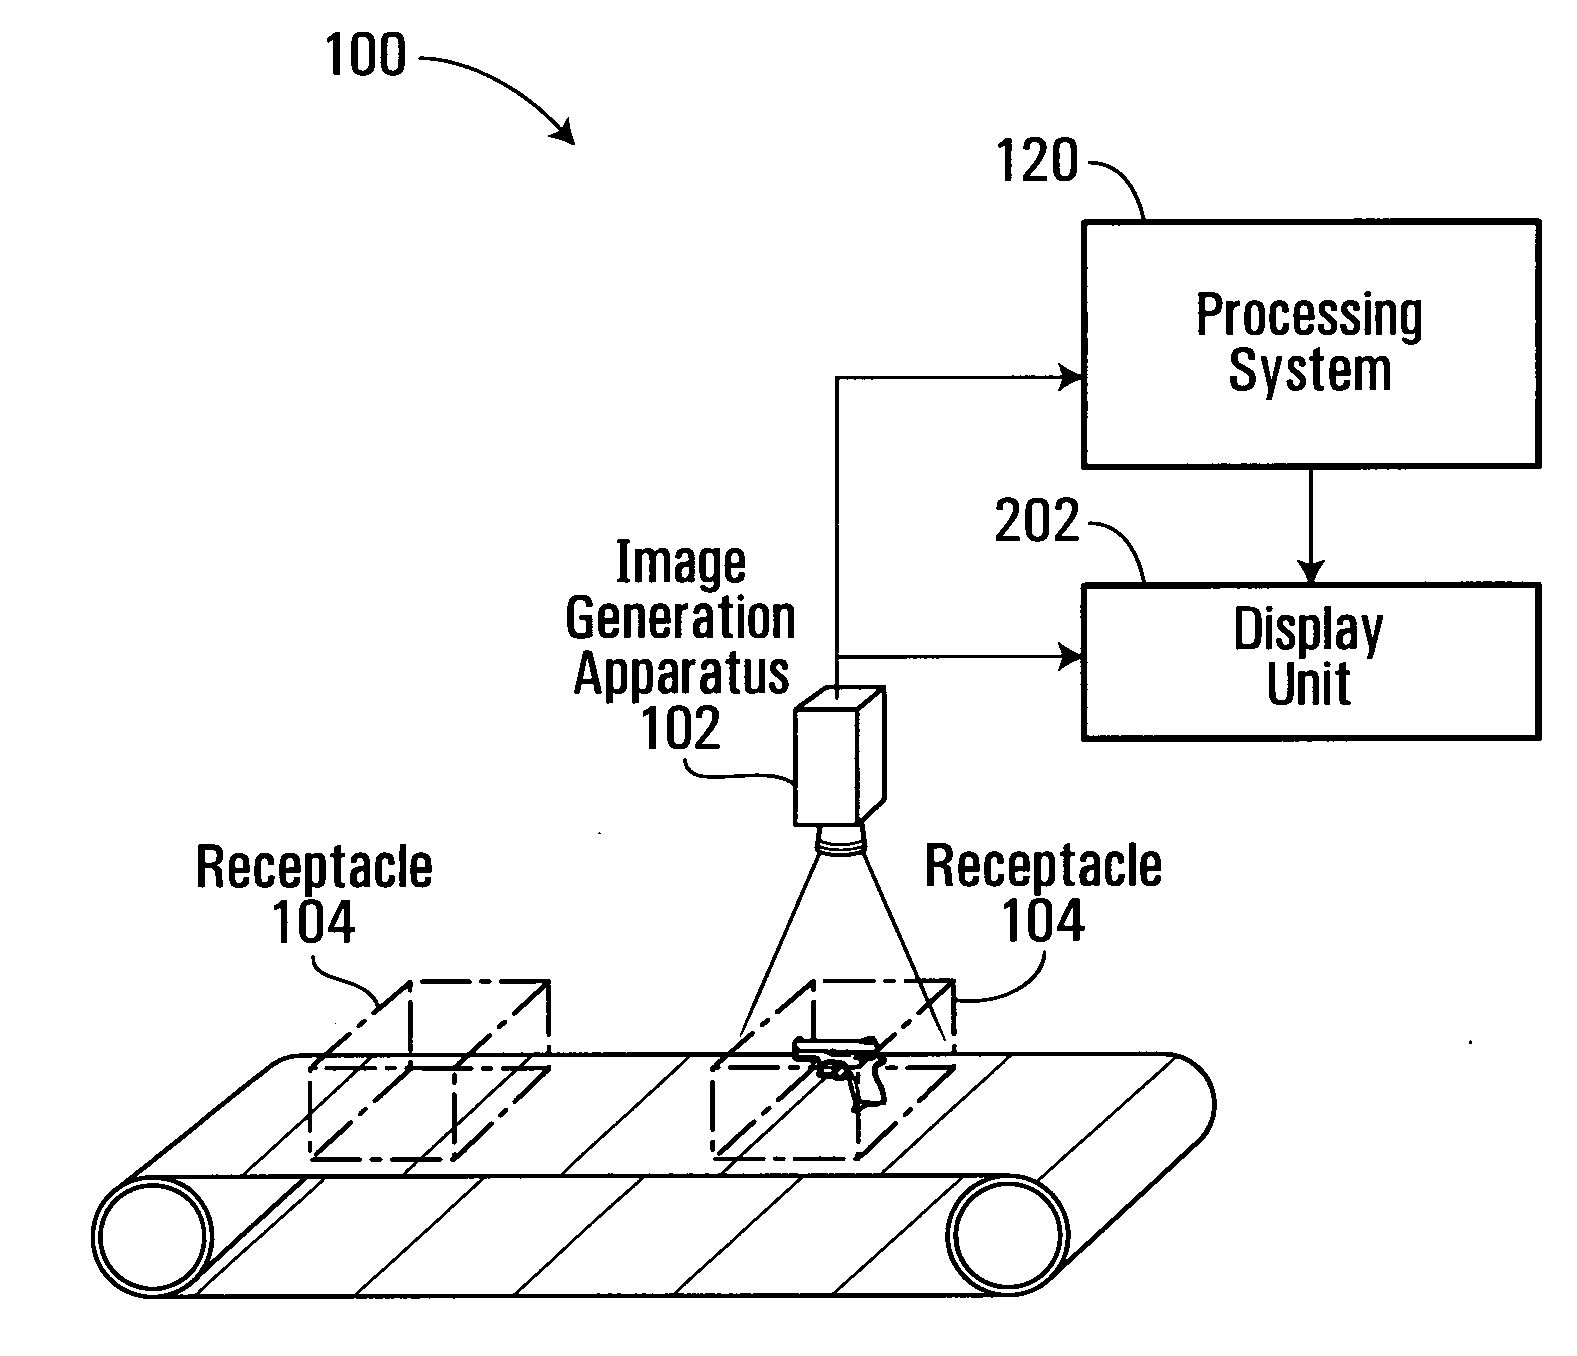 Methods and systems for use in security screening, with parallel processing capability